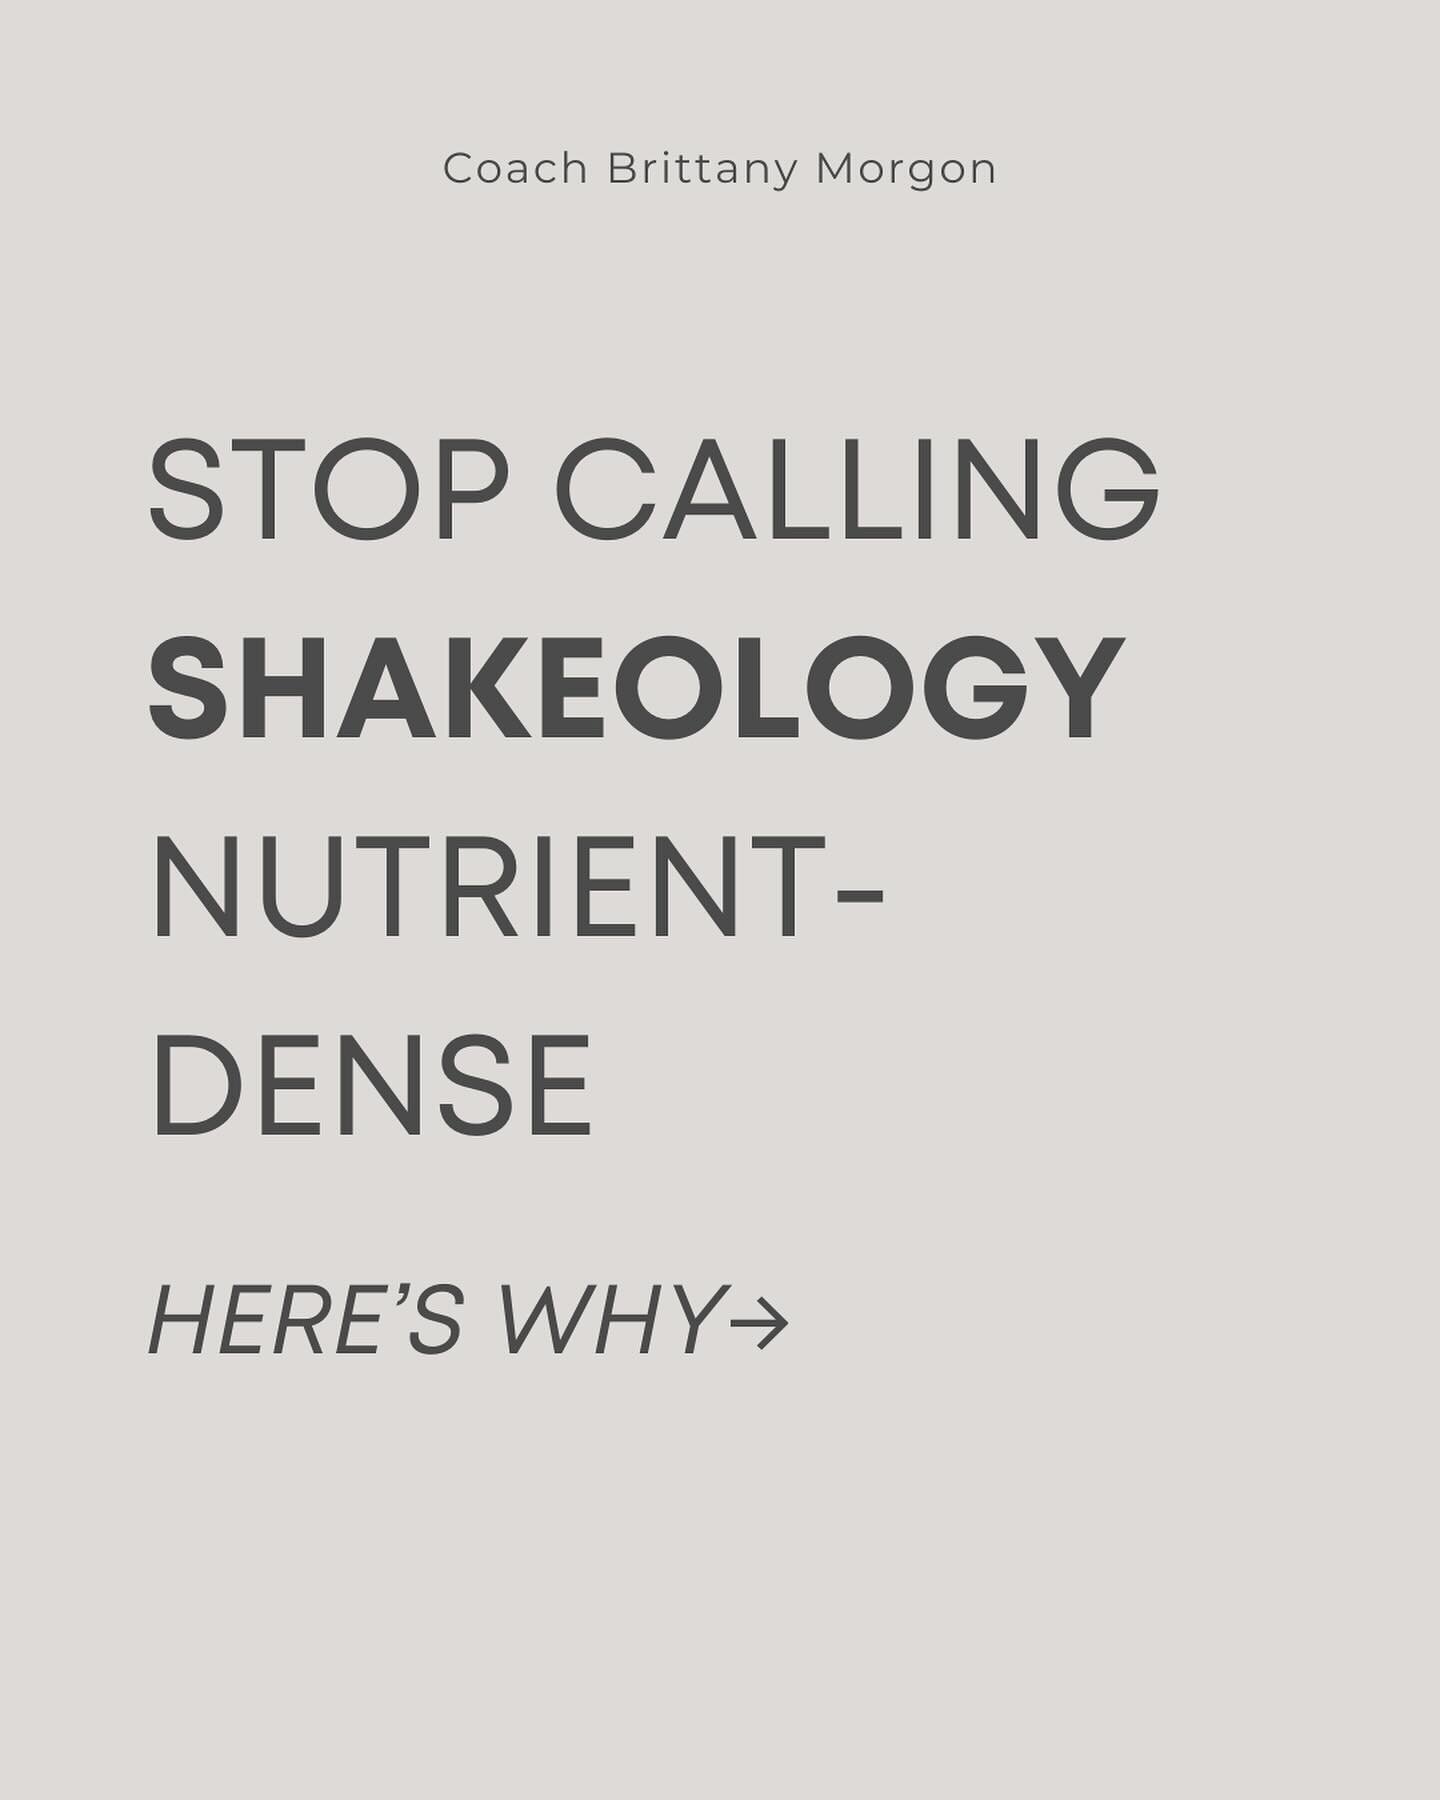 It&rsquo;s honesty hour and I&rsquo;m not holding back.

SO MANY PEOPLE think that Shakeology is their #dailydoseofdensenutrition. 

It&rsquo;s been marketed and hyped up as the ultimate superfood shake &ndash; but let me tell you, that&rsquo;s a loa